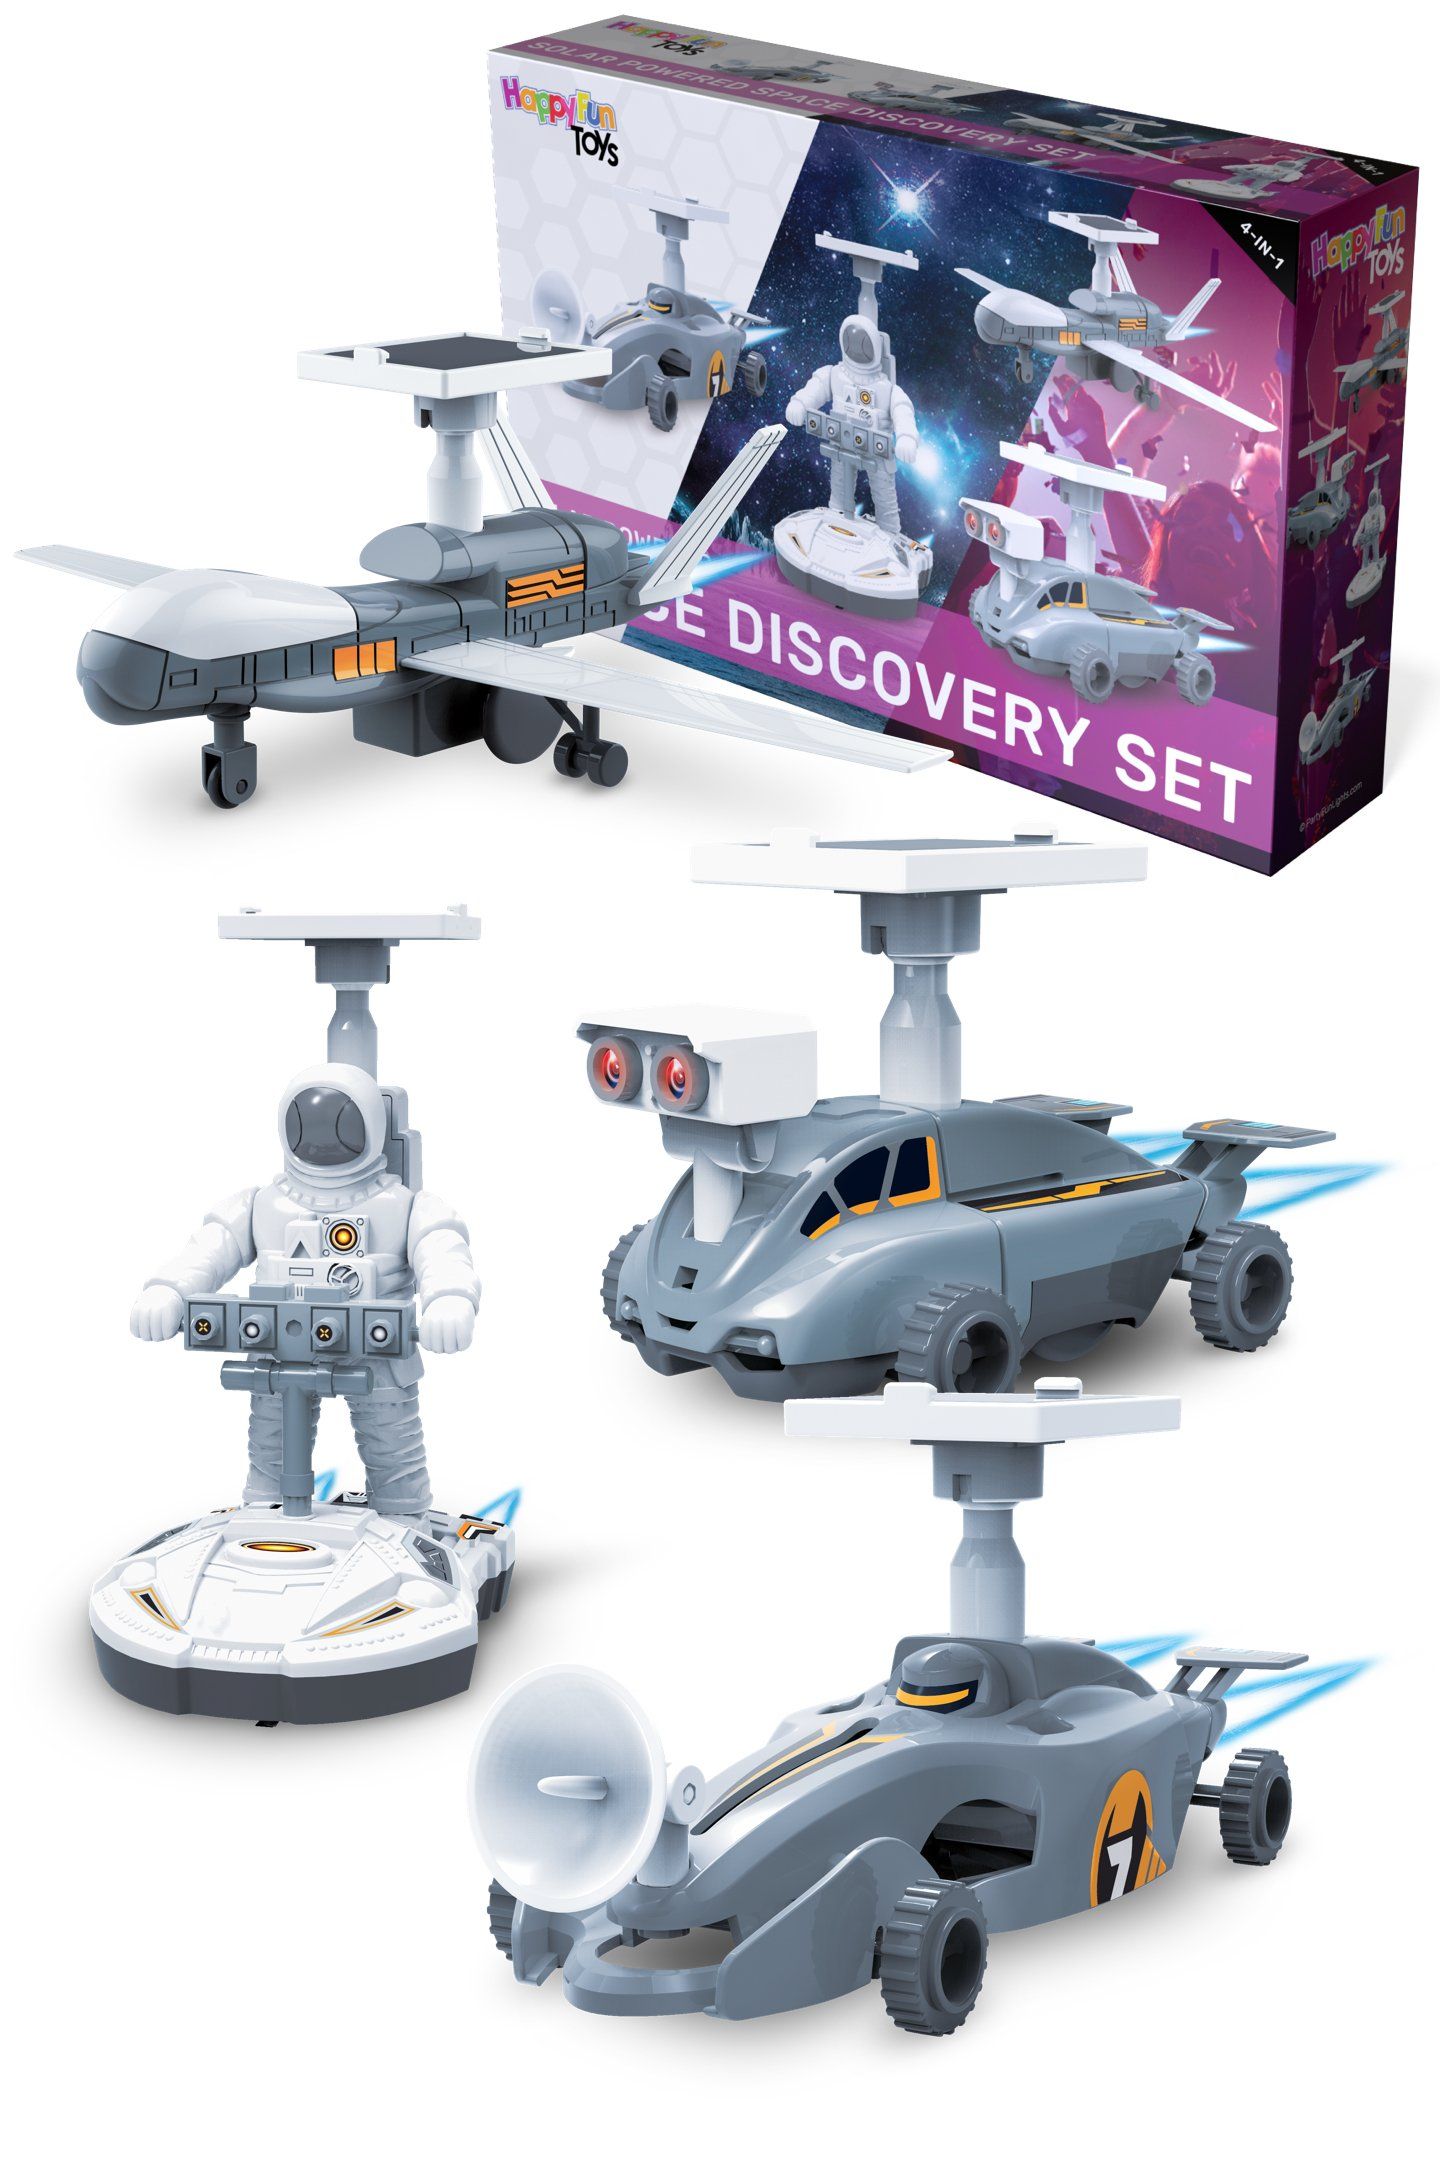 4-in-1 Solar Powered Space Discovery Set